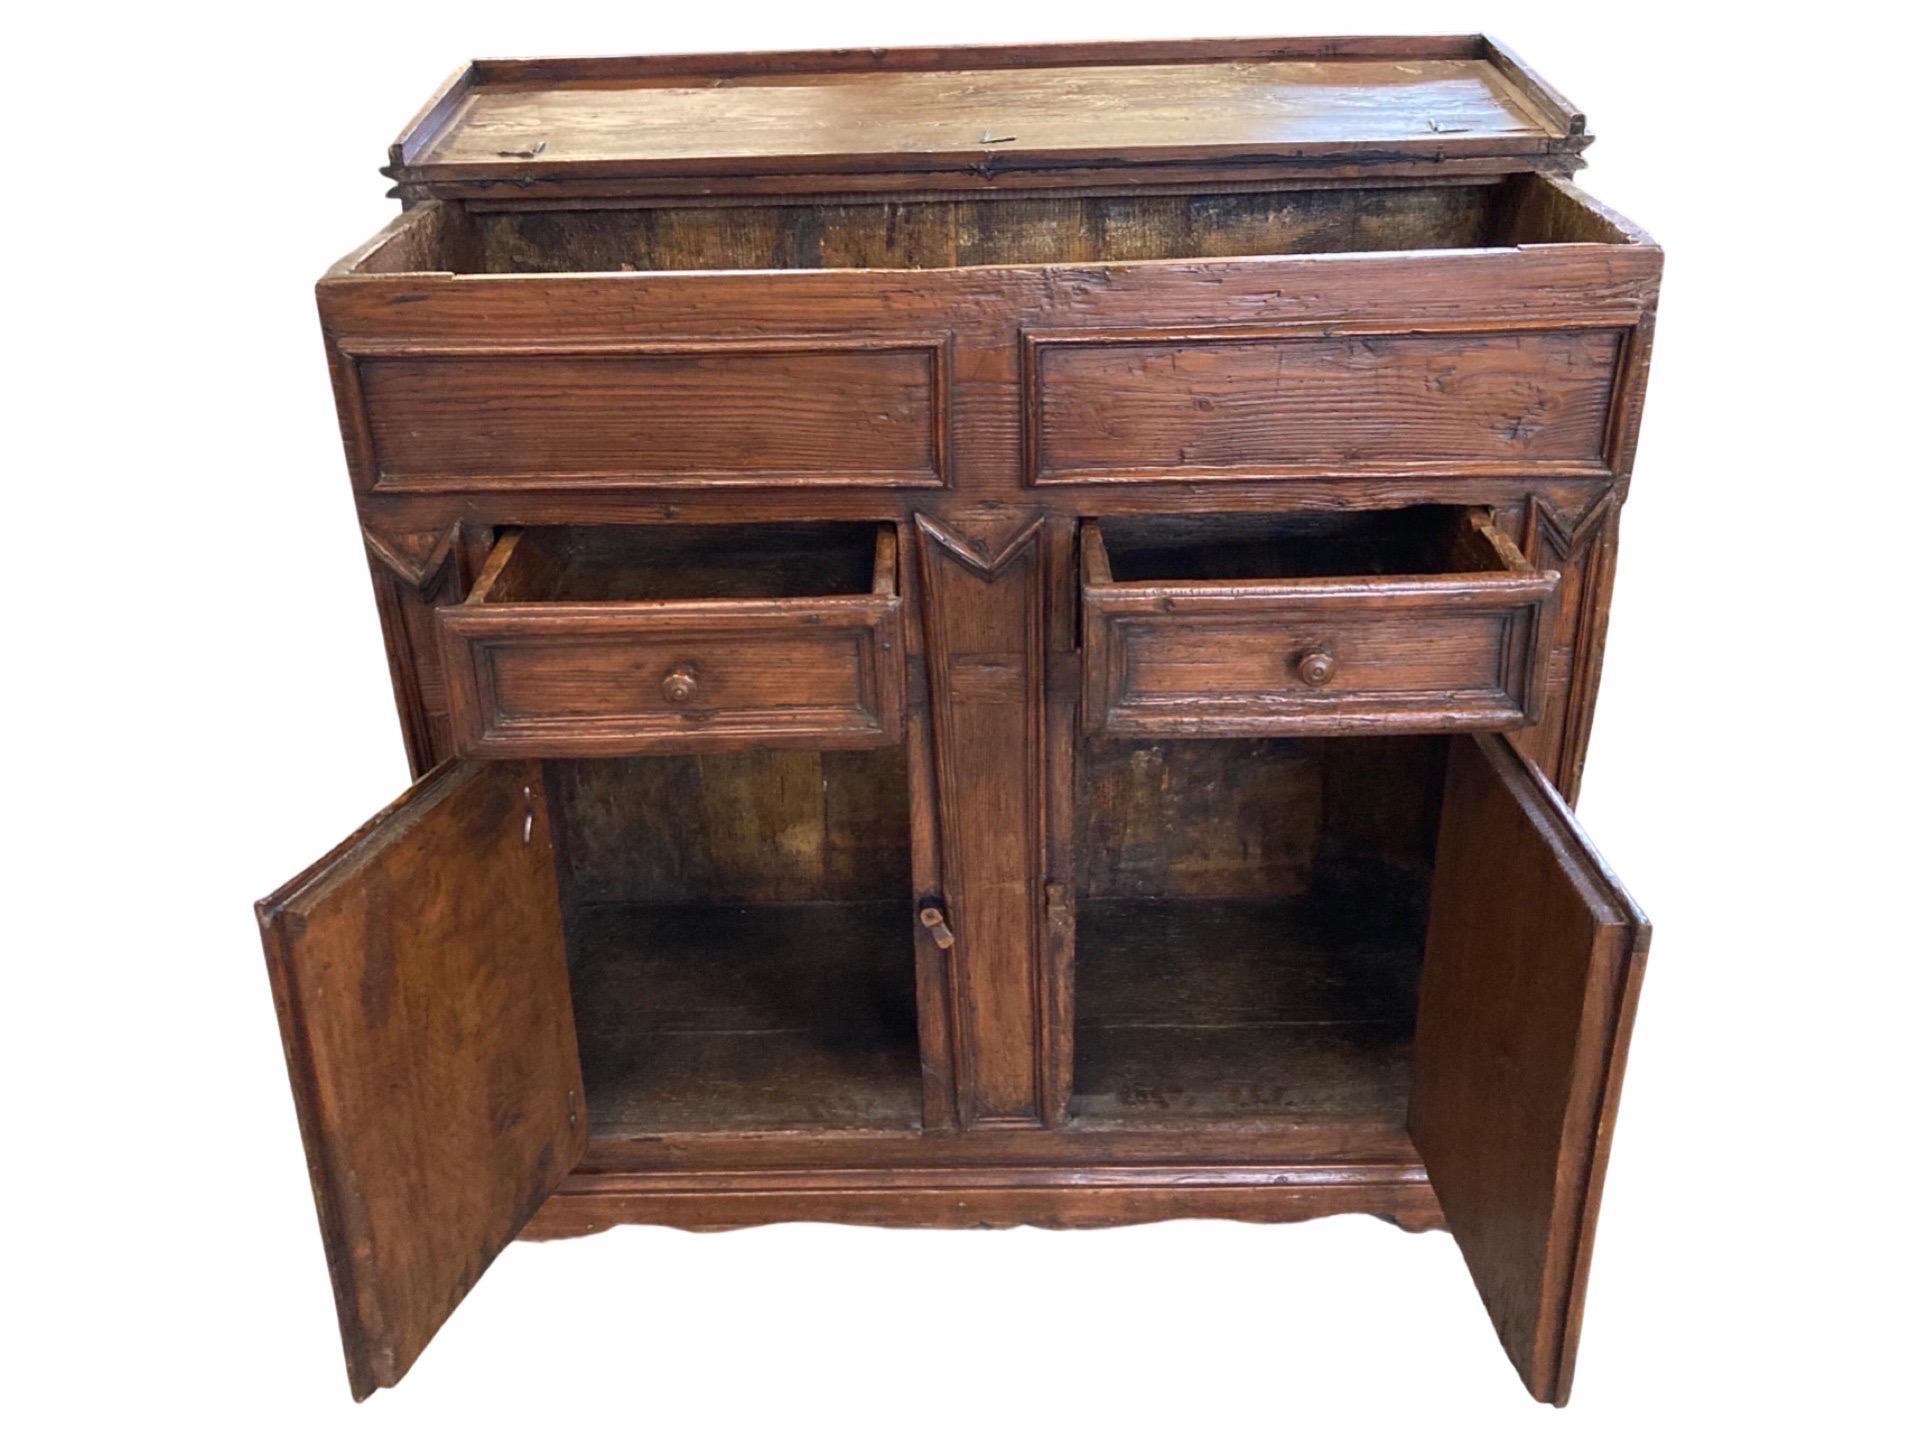 Buffet, or madia, hand-made in Italy in the early 1800s using pine. The wood has been stained a walnut color, which gives this buffet a very warm and elegant look. In fact, this is a piece that although was originally made for a country home, it